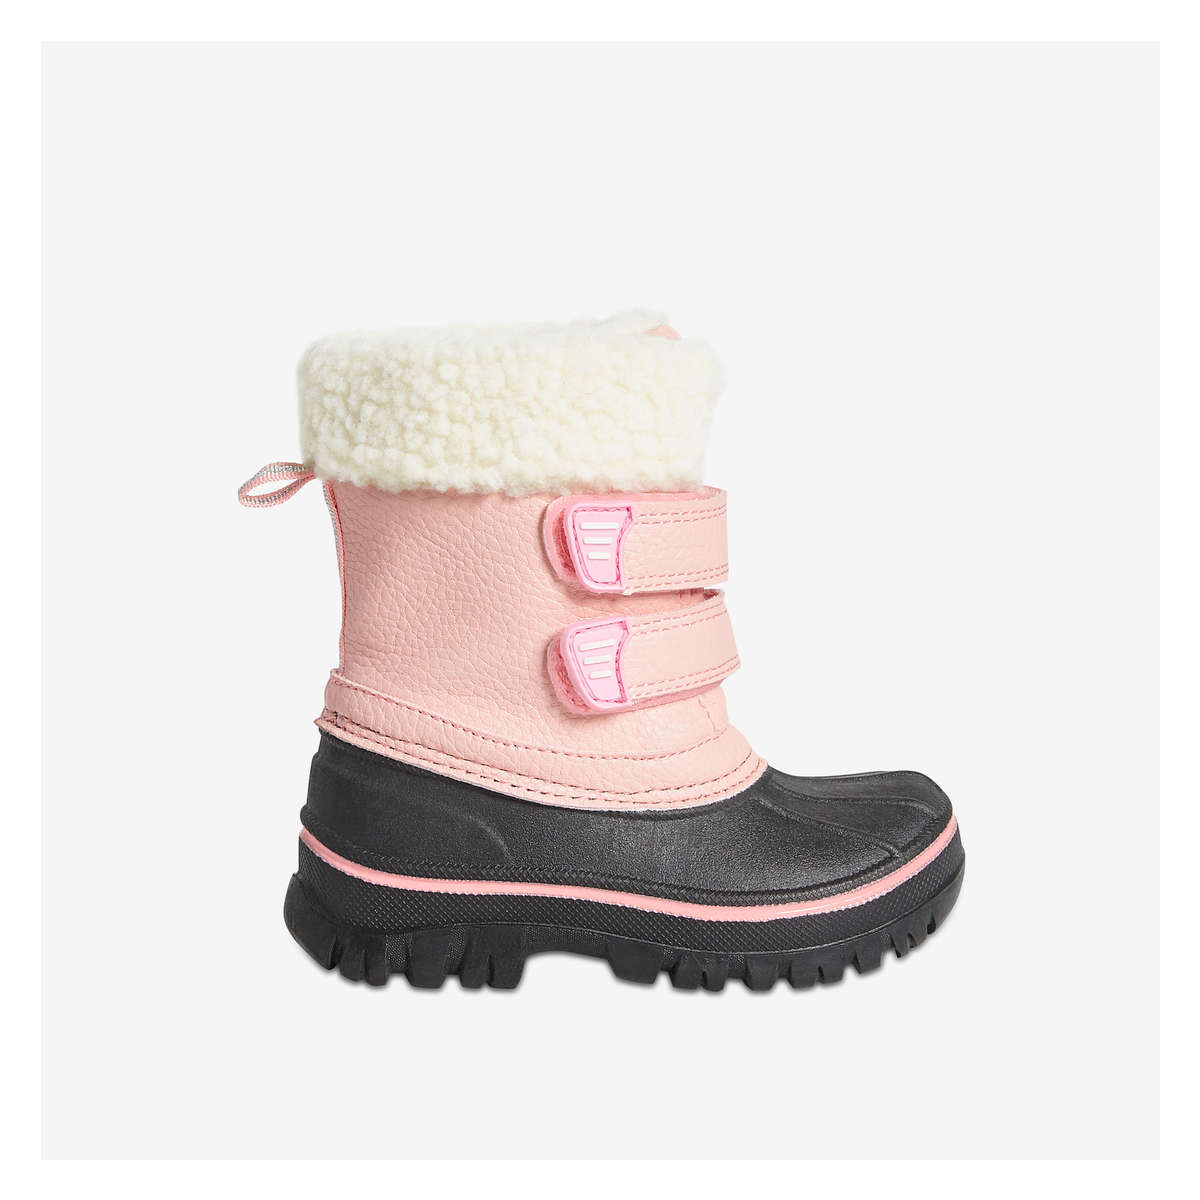 Baby Girls' Snow Boots in Pink from Joe 